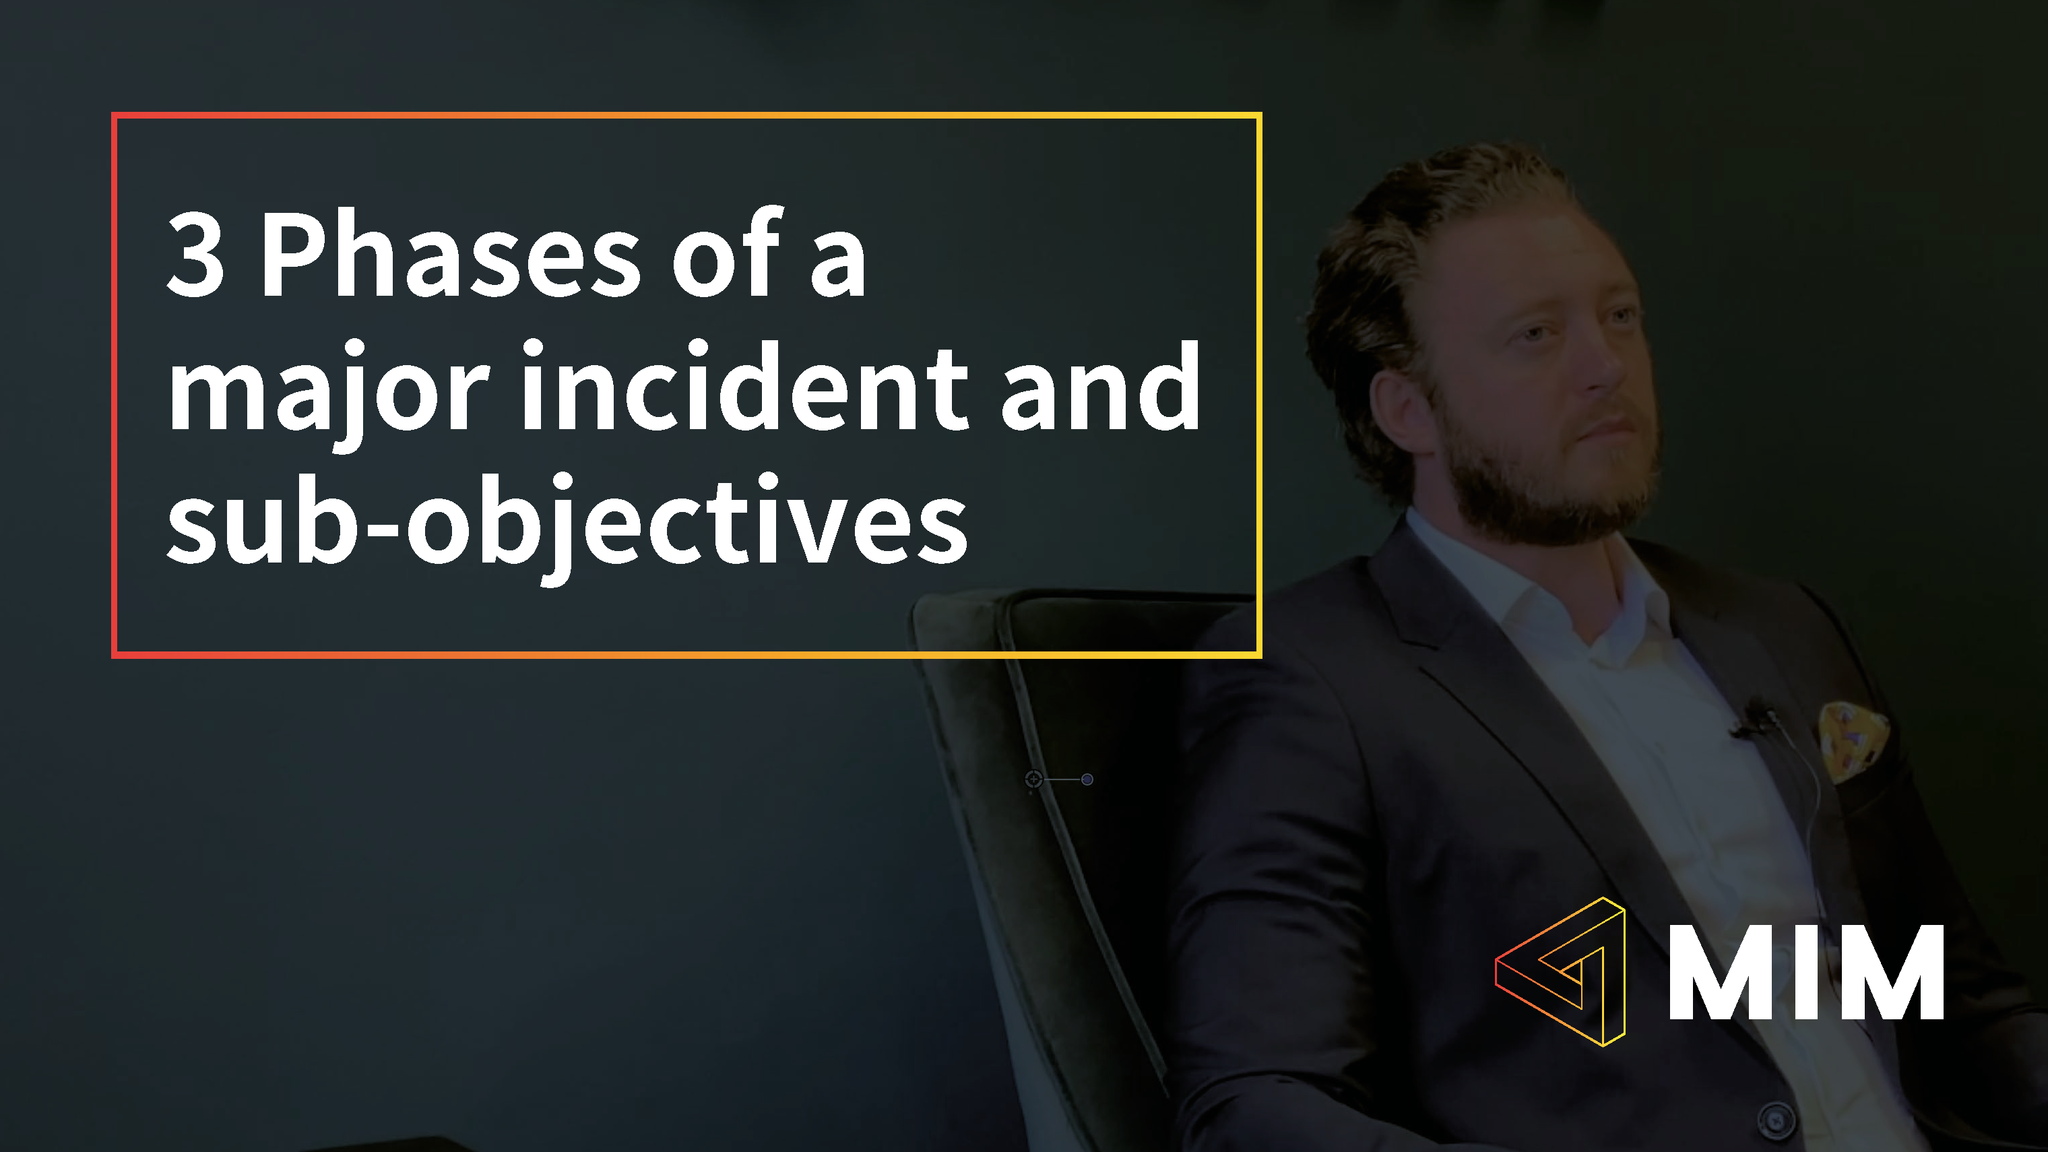 3 Phases of a Major Incident and sub-objectives